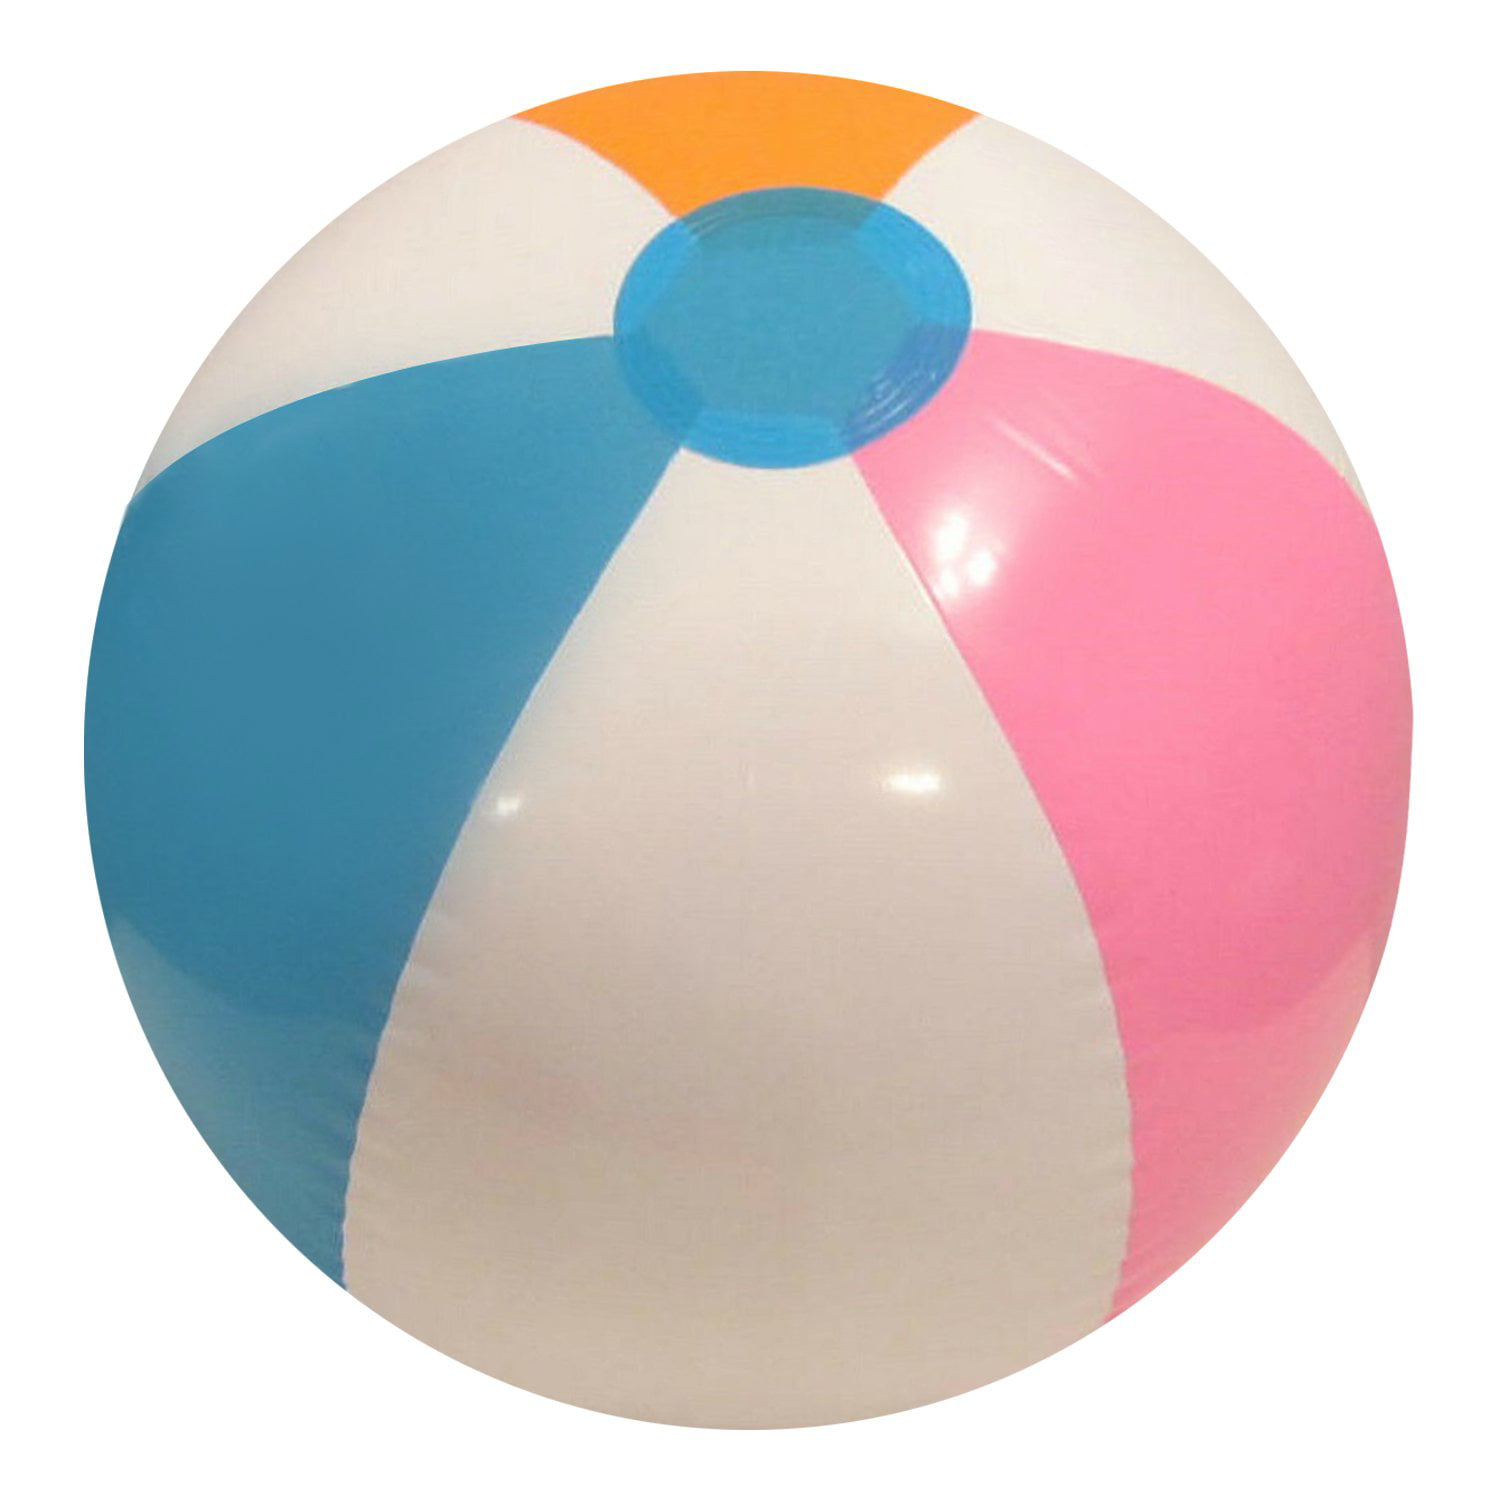 2 PCS INTEX 24" Inflatable Beach Ball Swimming Pool Party Kids Toy59032EP 